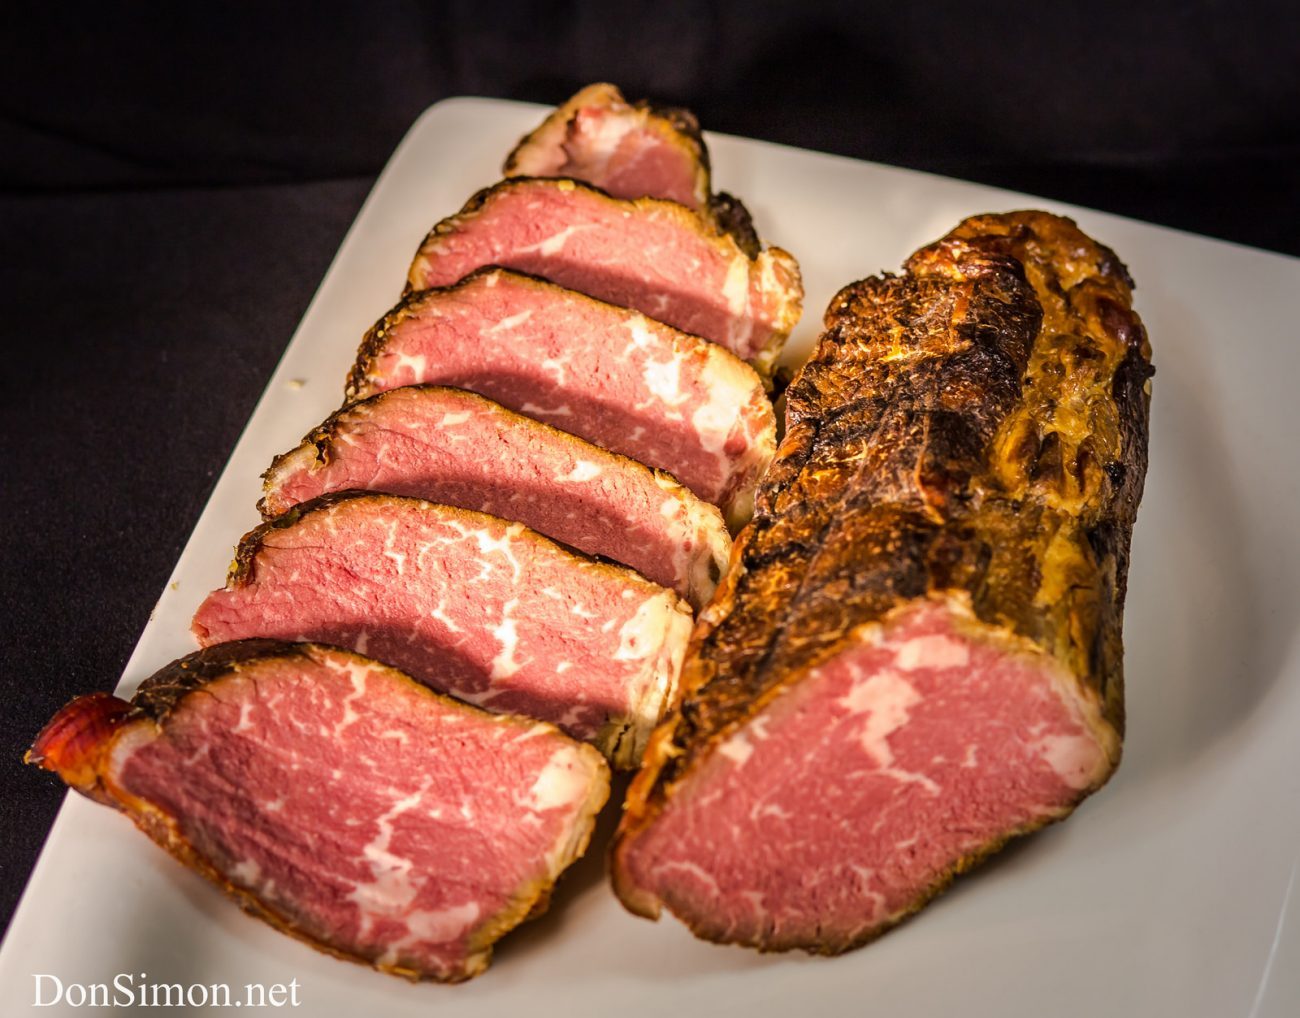 http://meatreview.com/wp-content/uploads/2016/12/cold-smoked-beef-1300x1018-1300x1018.jpg